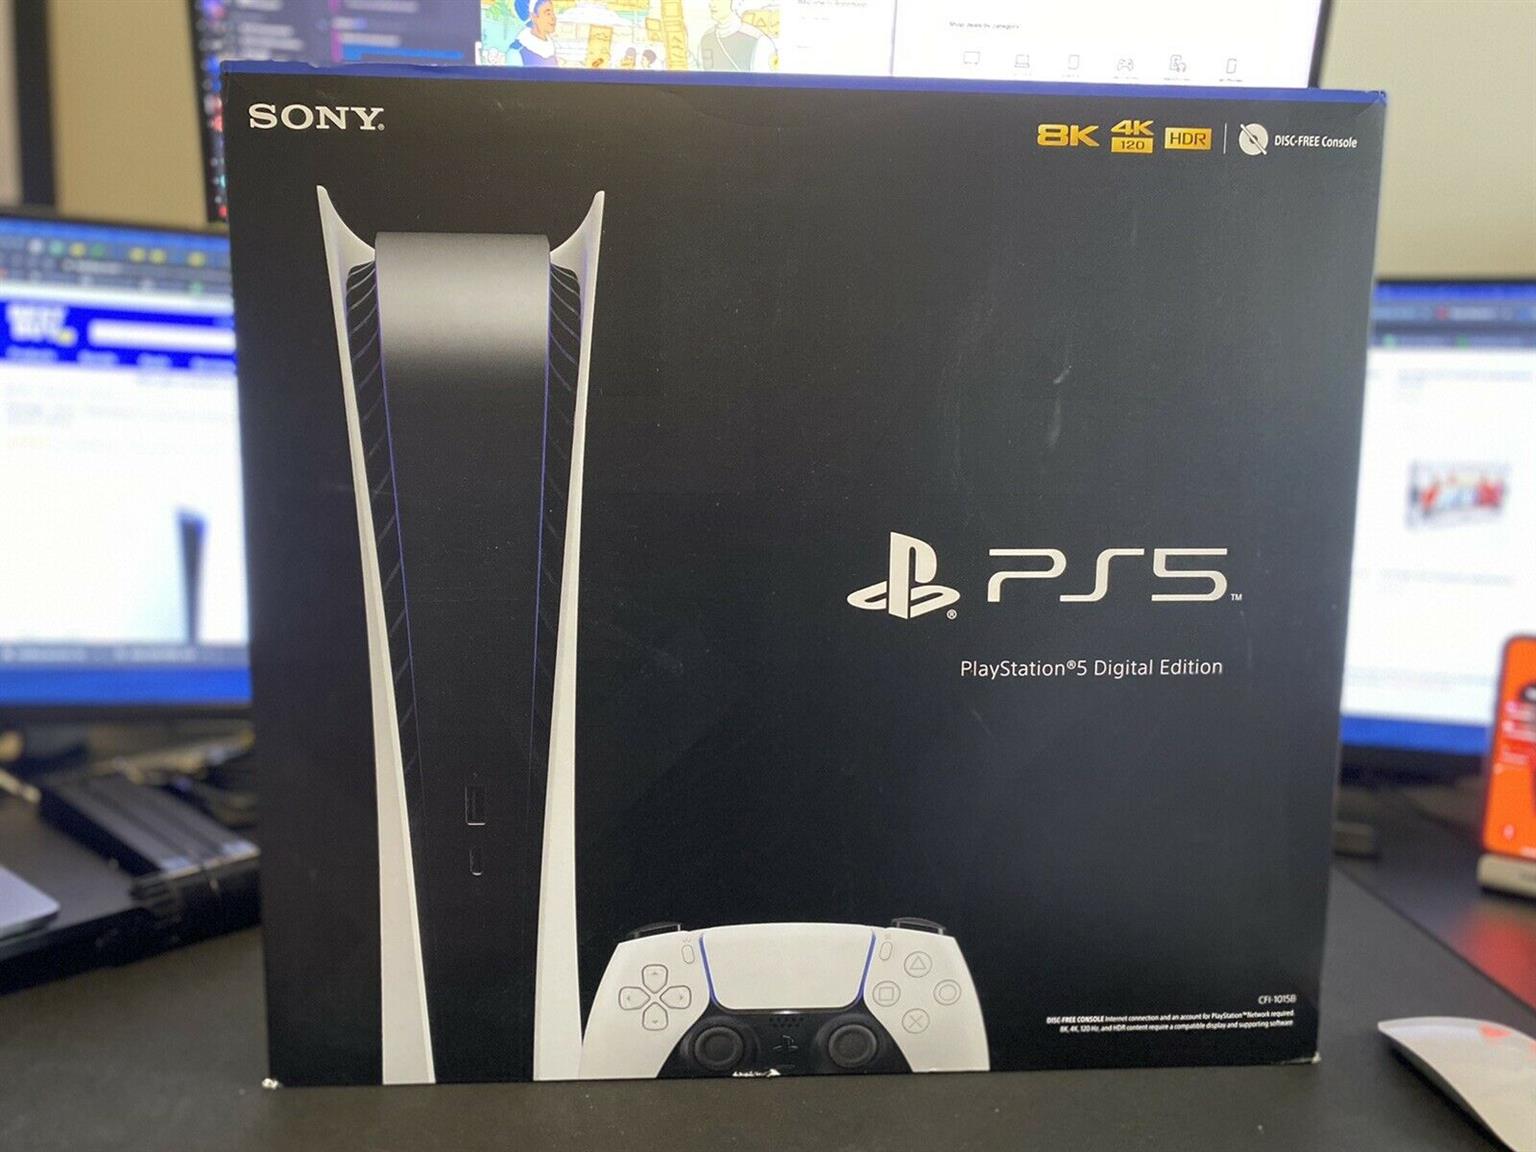 PS 5 Sony Playstation 5 console digital version.